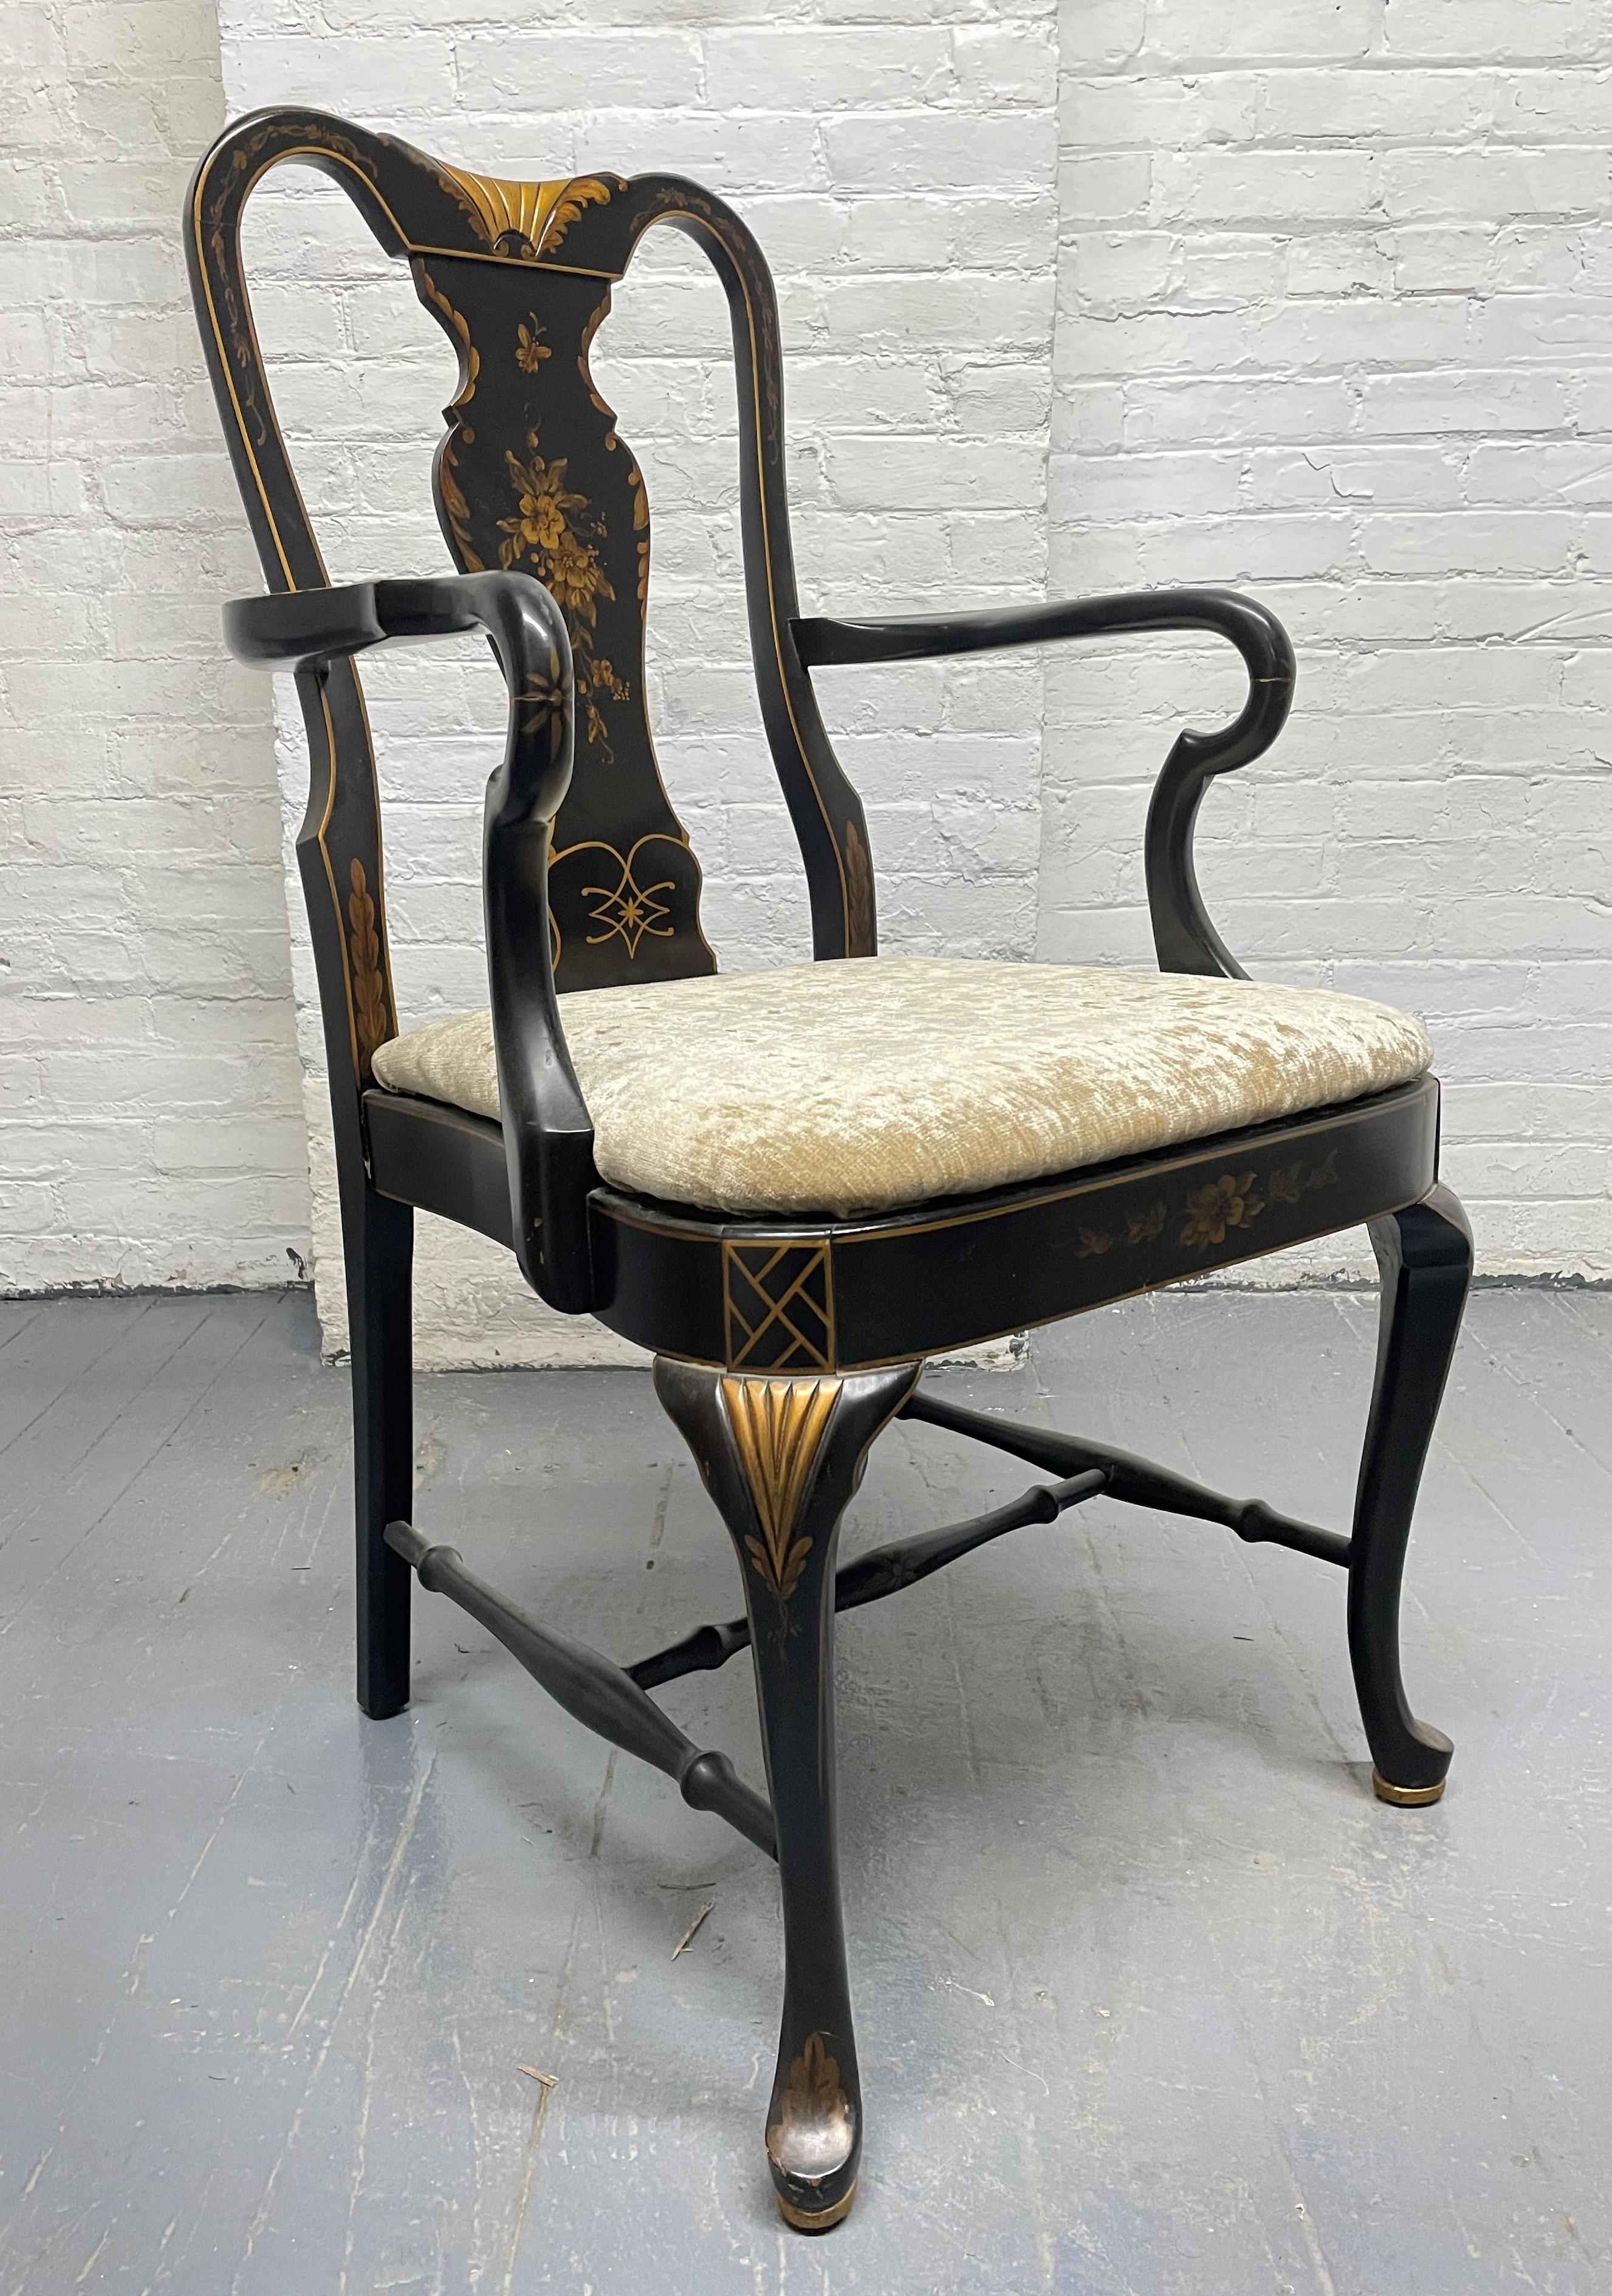 Queen Anne style armchair. The chair has a black lacquered frame, a velvet seat with a stenciled back.